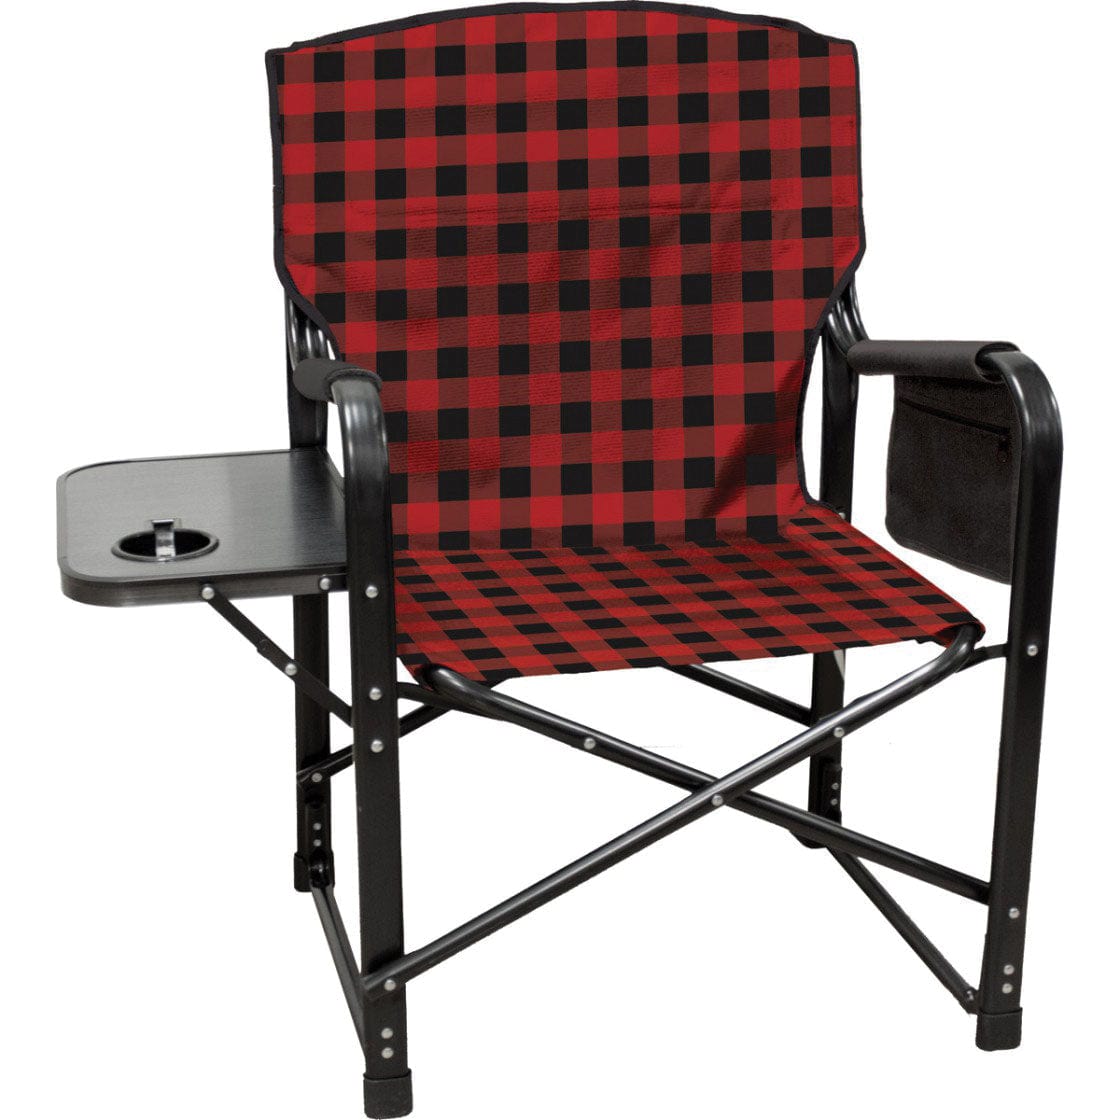 Kuma Outdoor Gear Not Qualified for Free Shipping Kuma Outdoor Gear Bear Paws Chair with Side Table Red Plaid #KM-BPCH-RPB